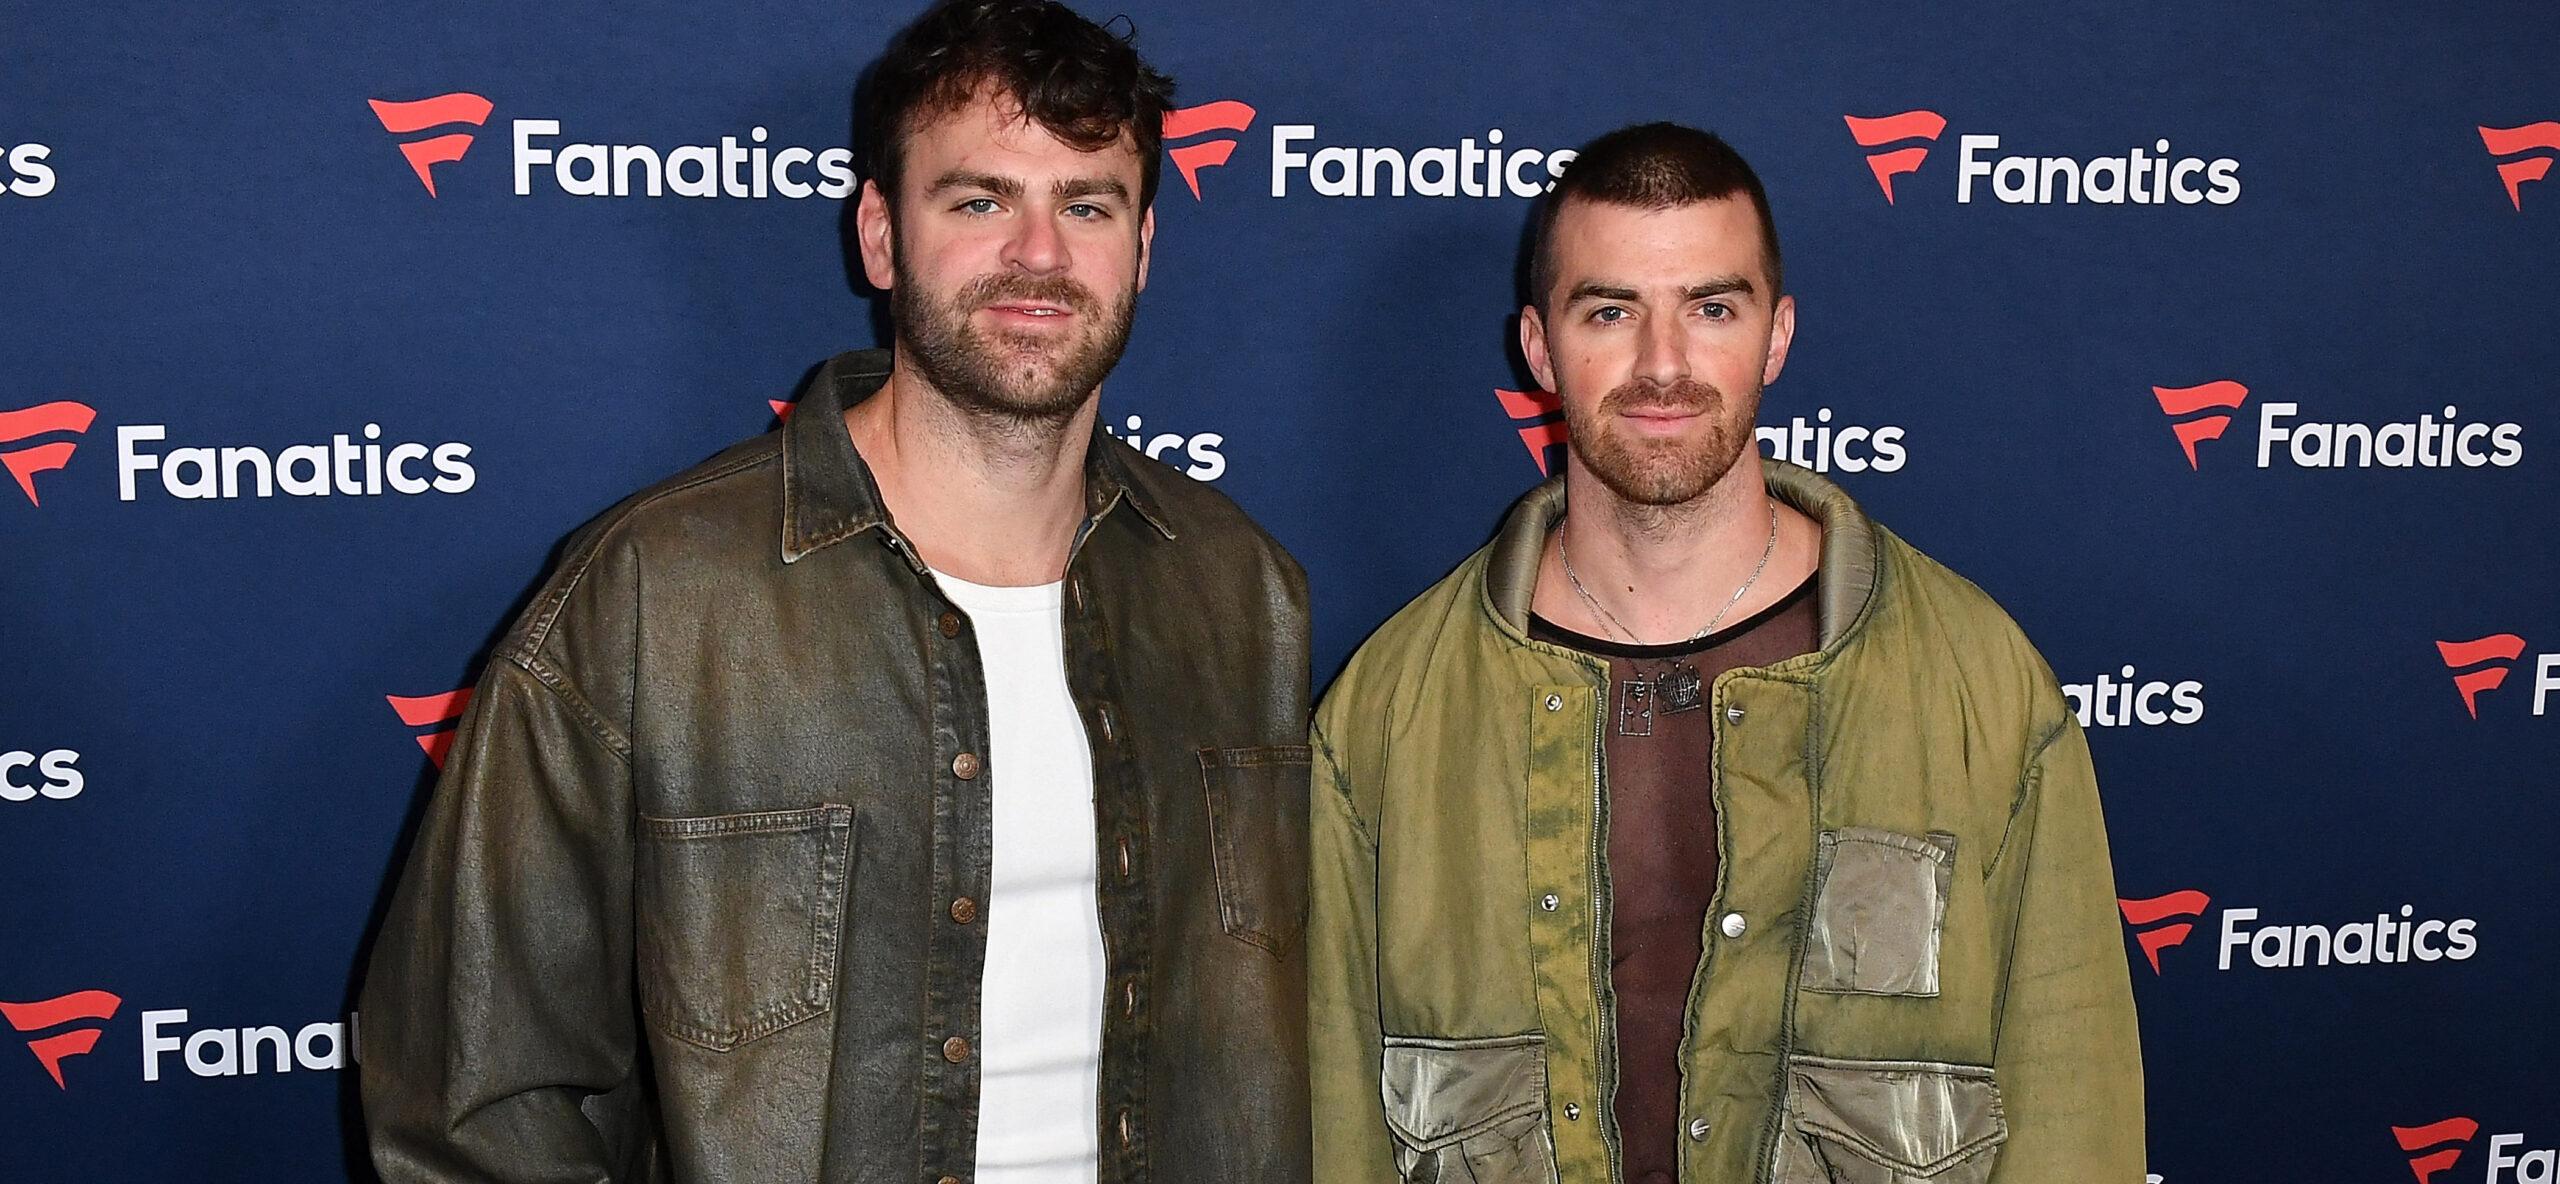 Party Time With Sports Illustrated And The Chainsmokers At ‘Revel At The Races’!